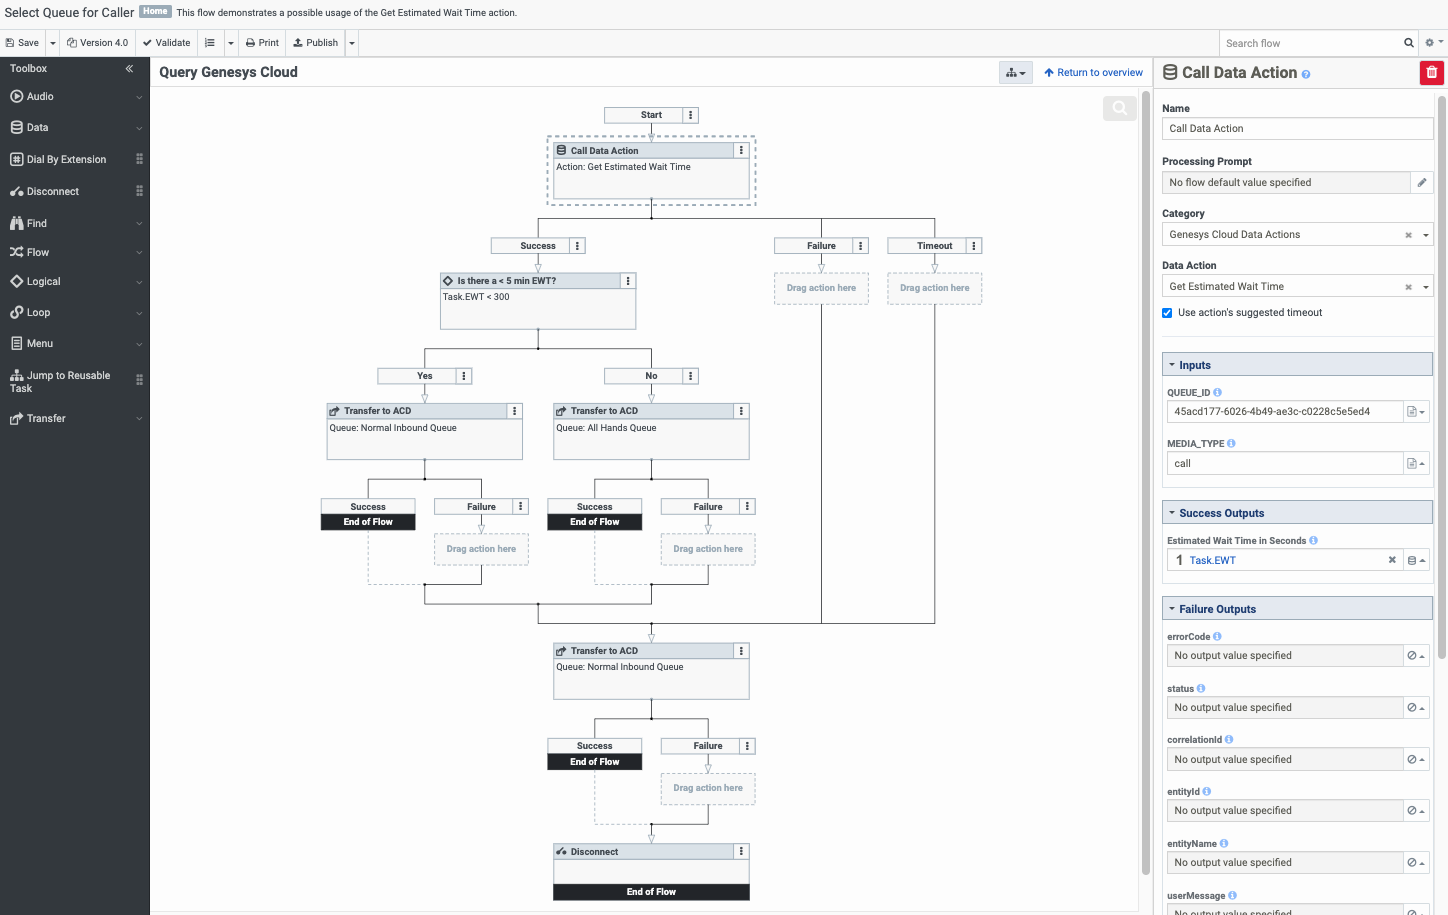 Example call flow for the Genesys Cloud data actions integration